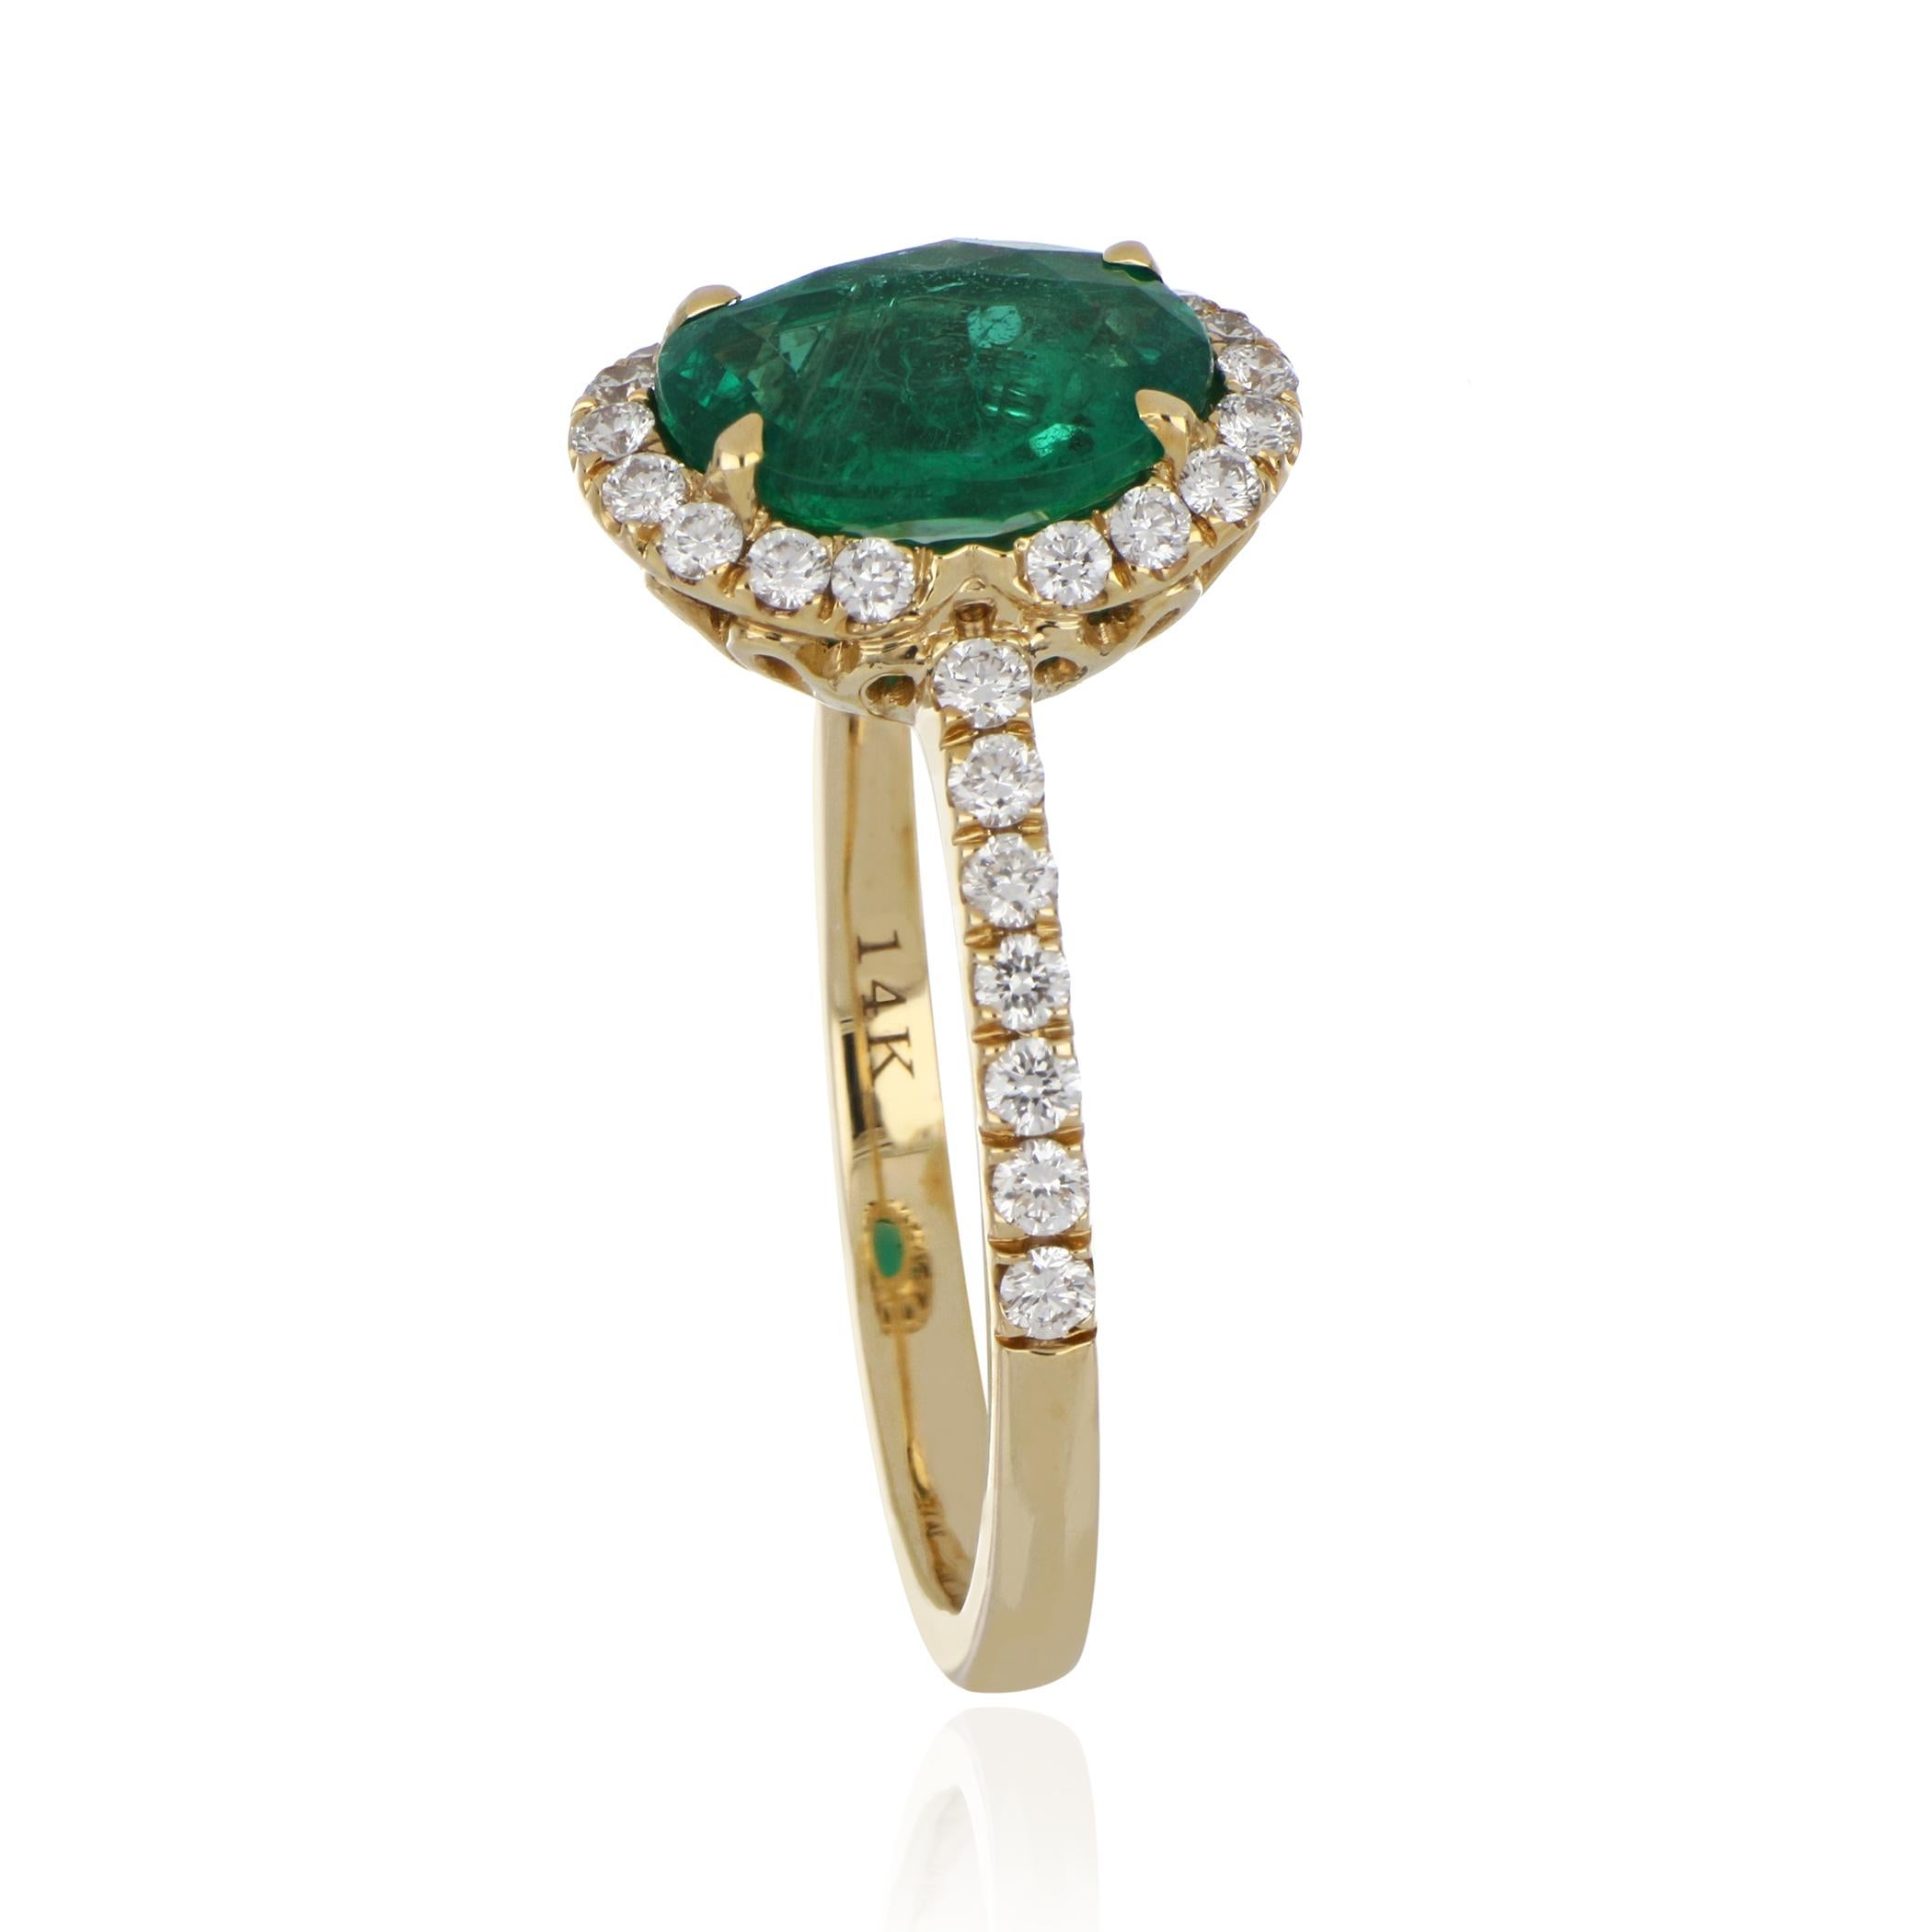 Contemporary 1.73 Carat Emerald Ring with Diamonds in 14 Karat Yellow Gold